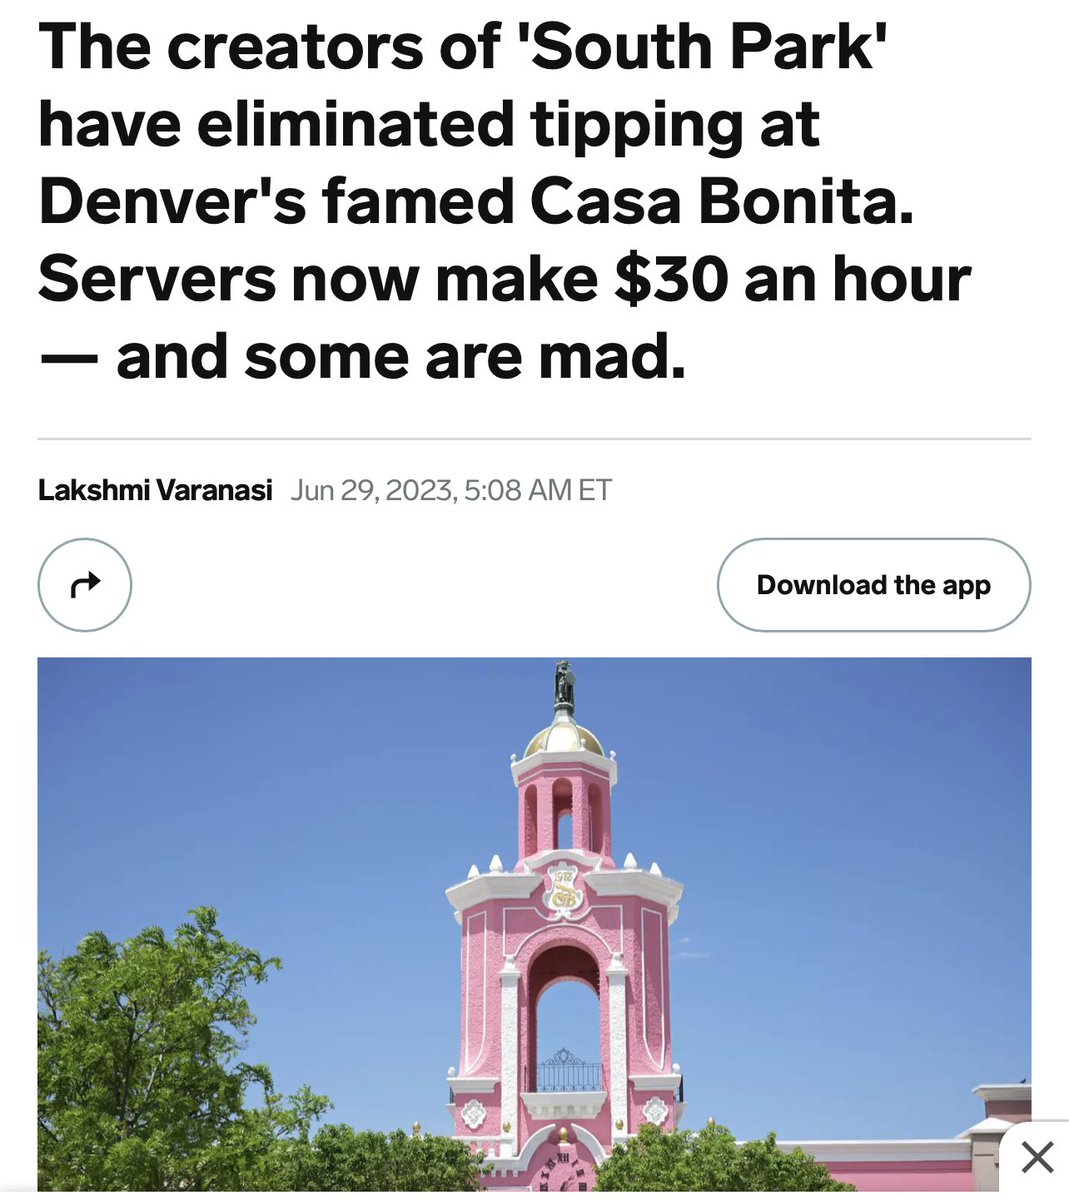 What do you think? Good move? Bad move? Should tipping culture die in America?